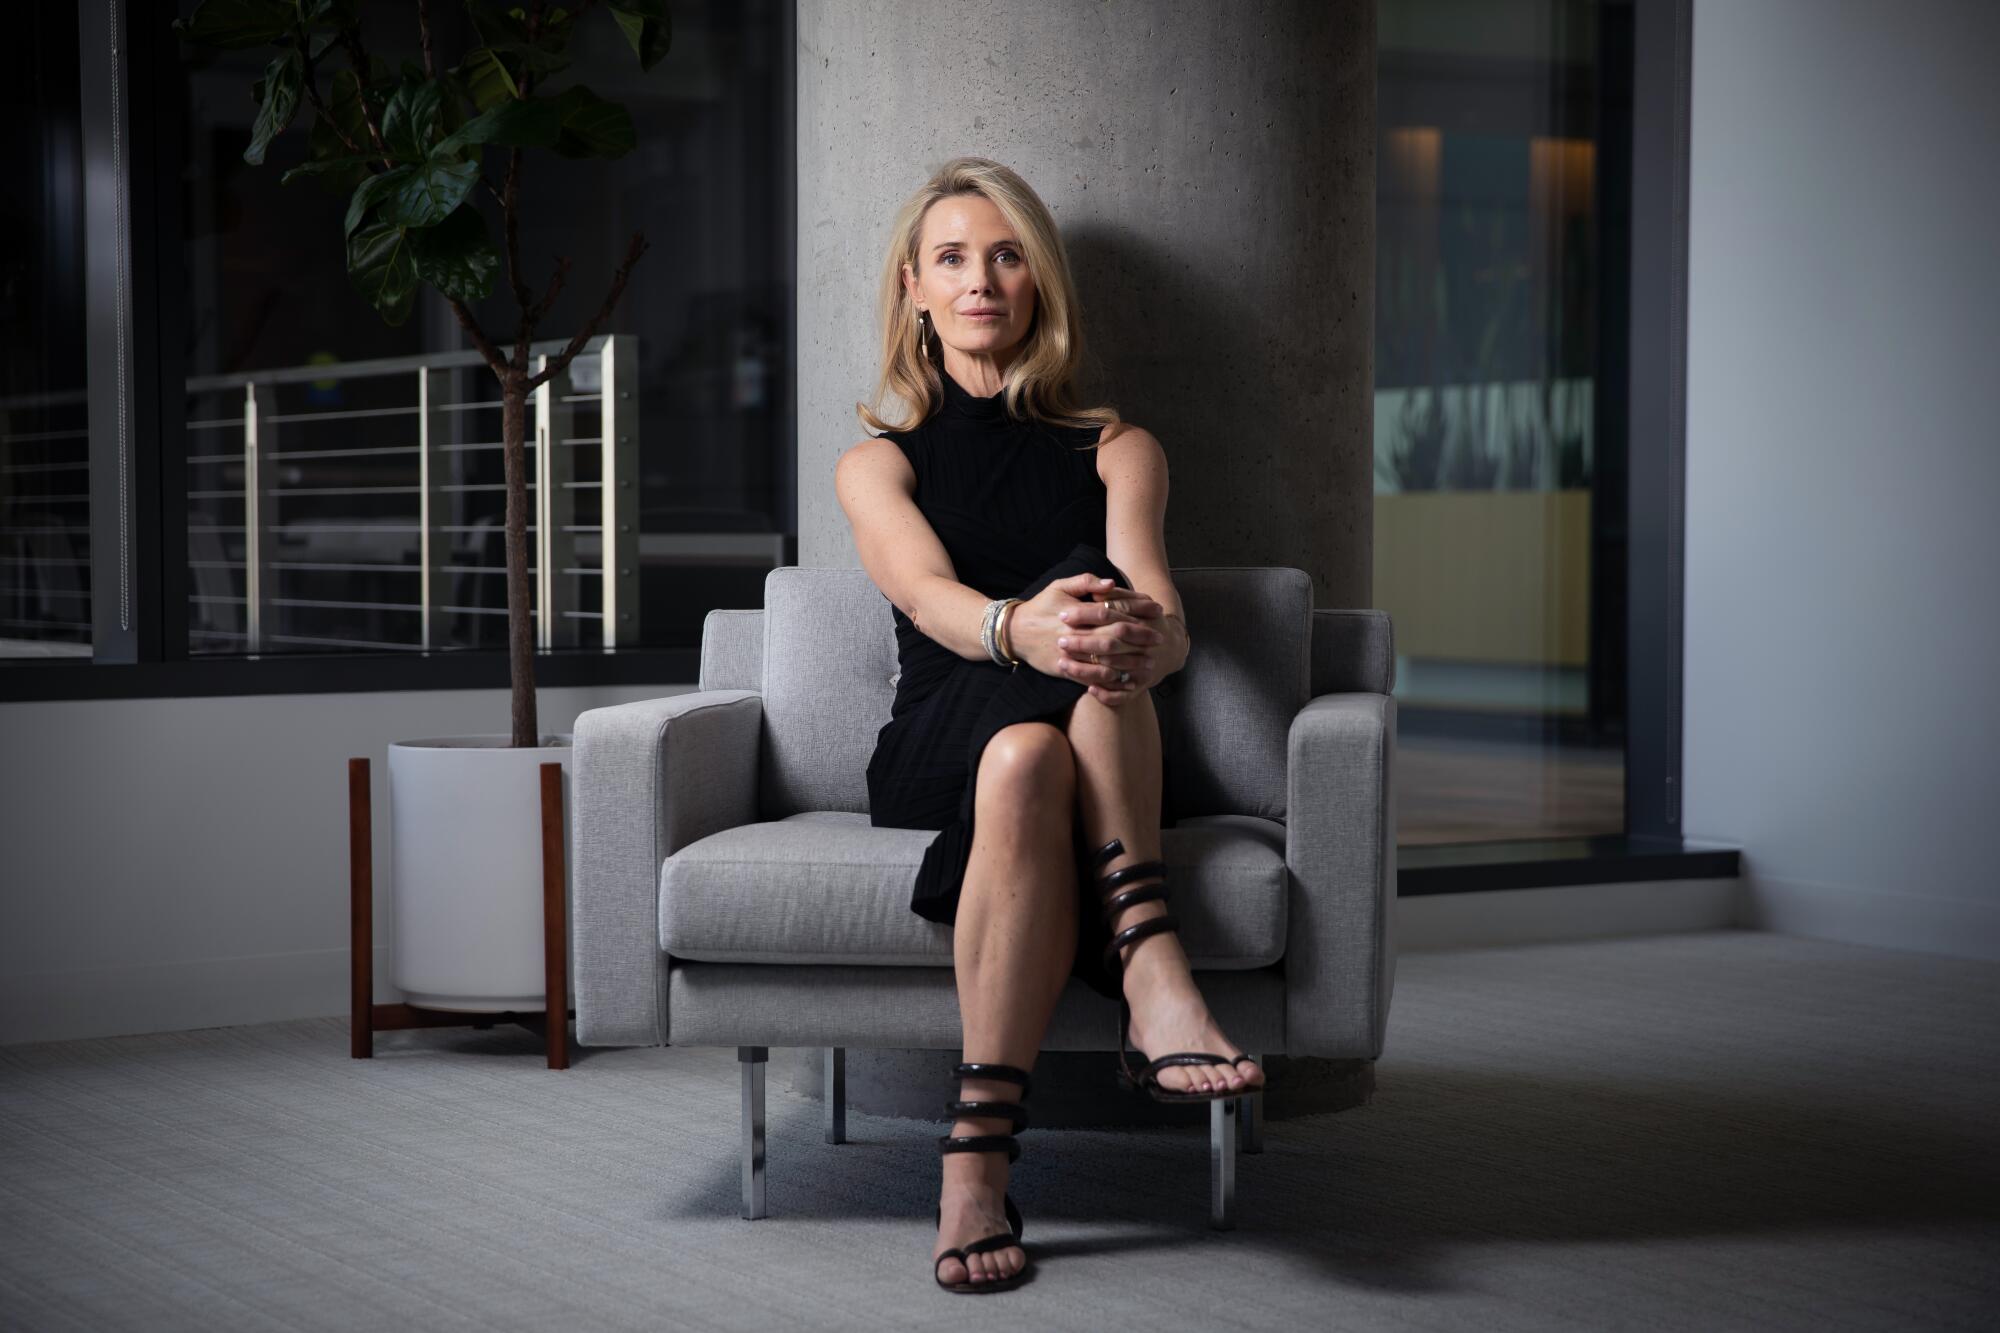 Jennifer Siebel Newsom sitting with legs crossed, hands on one knee, in a gray room